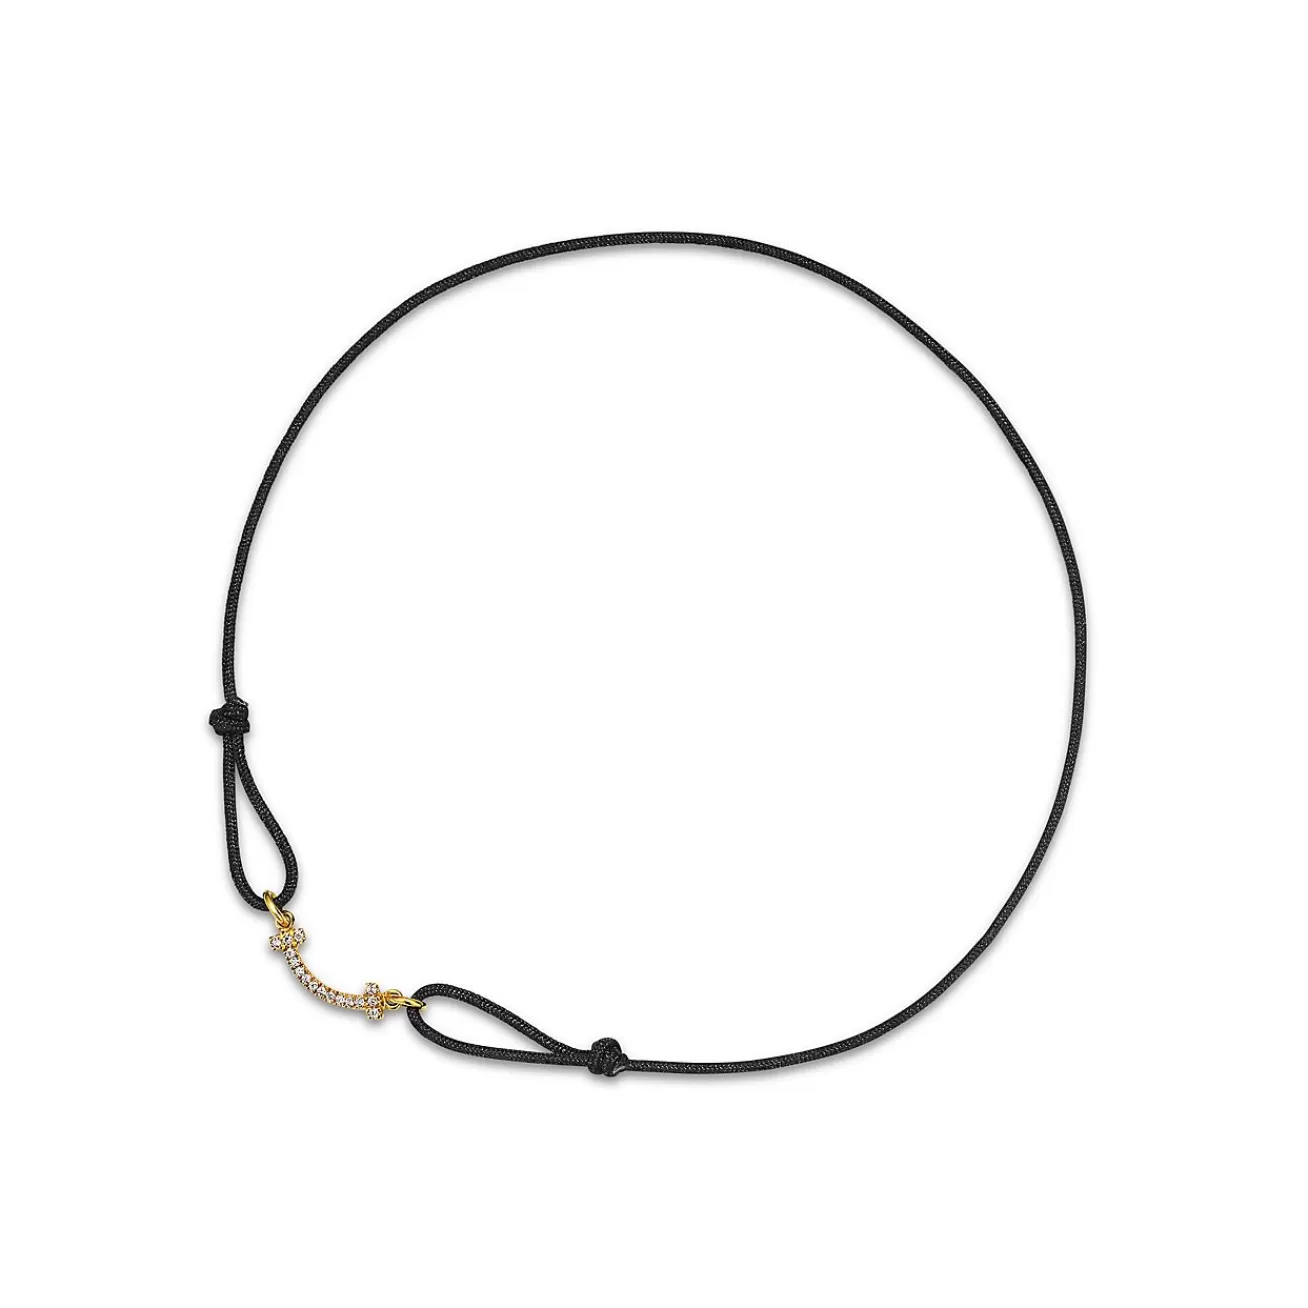 Tiffany & Co. Tiffany T Smile Bracelet in Yellow Gold on a Black Cord with Diamonds | ^ Bracelets | Gifts for Her